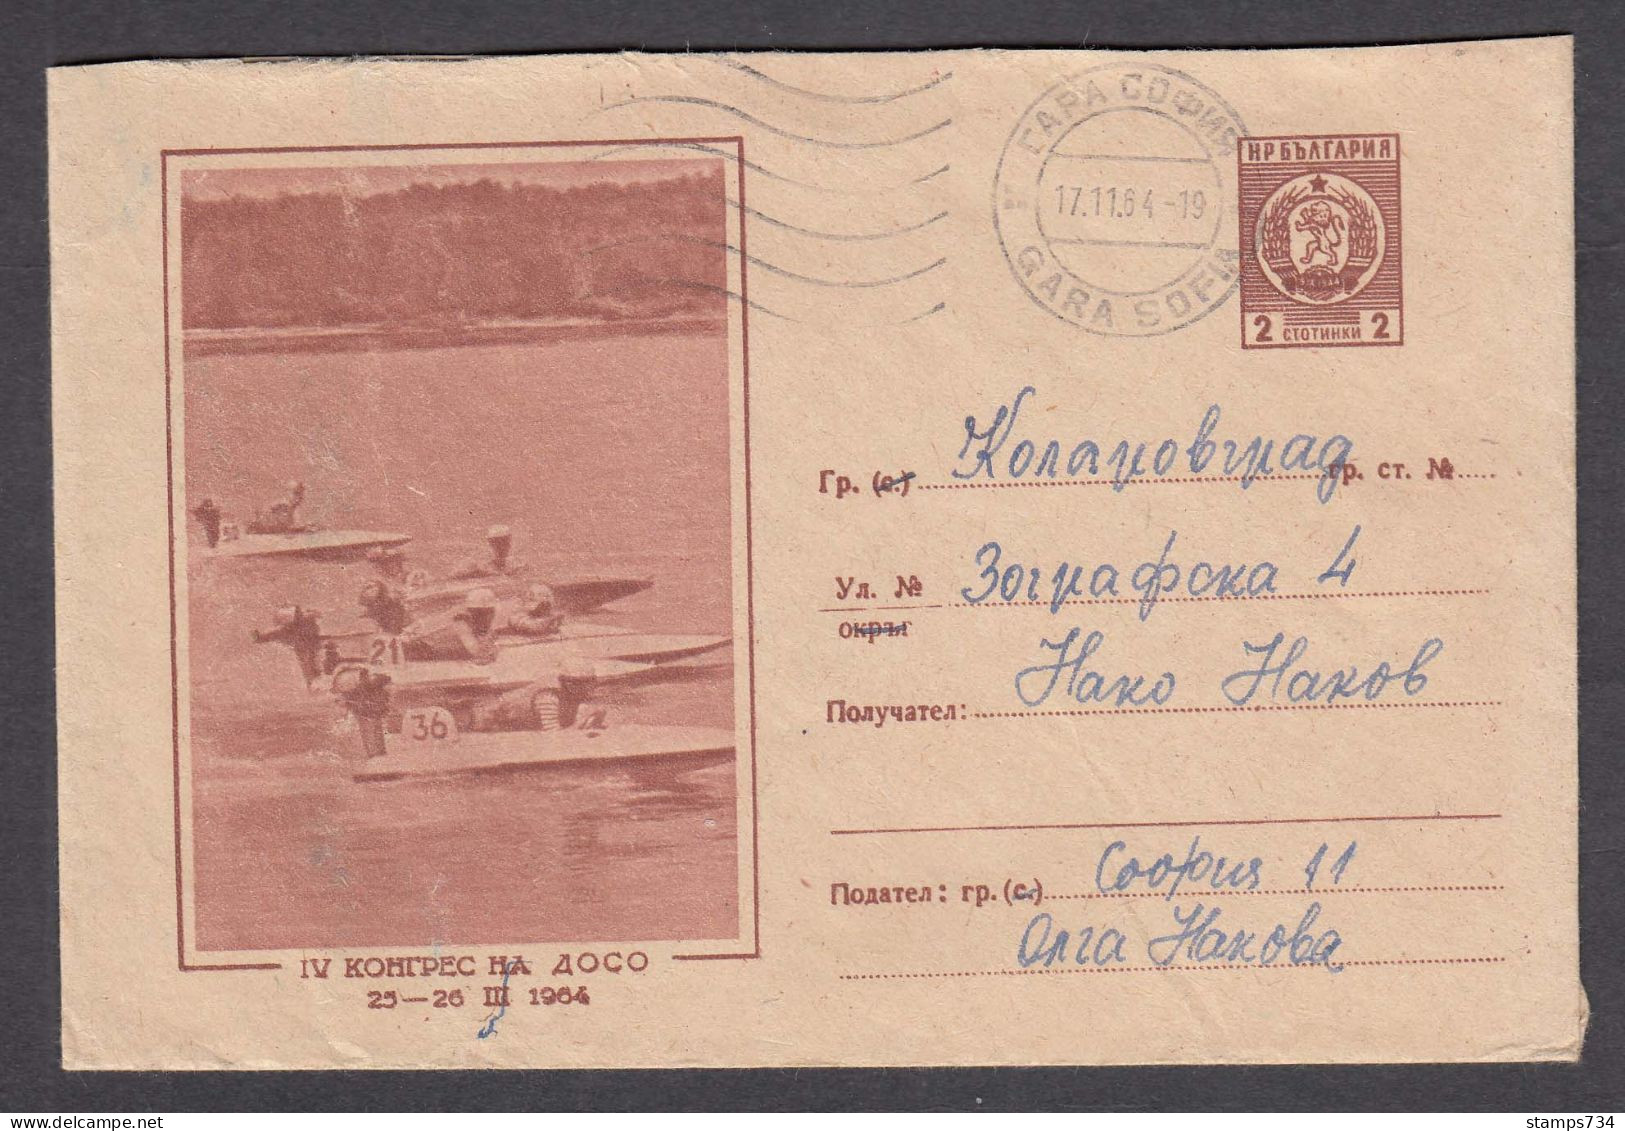 PS 086/1964, 4th DOSO Congress - Scooter Race , Post. Stationery - Bulgaria - Covers